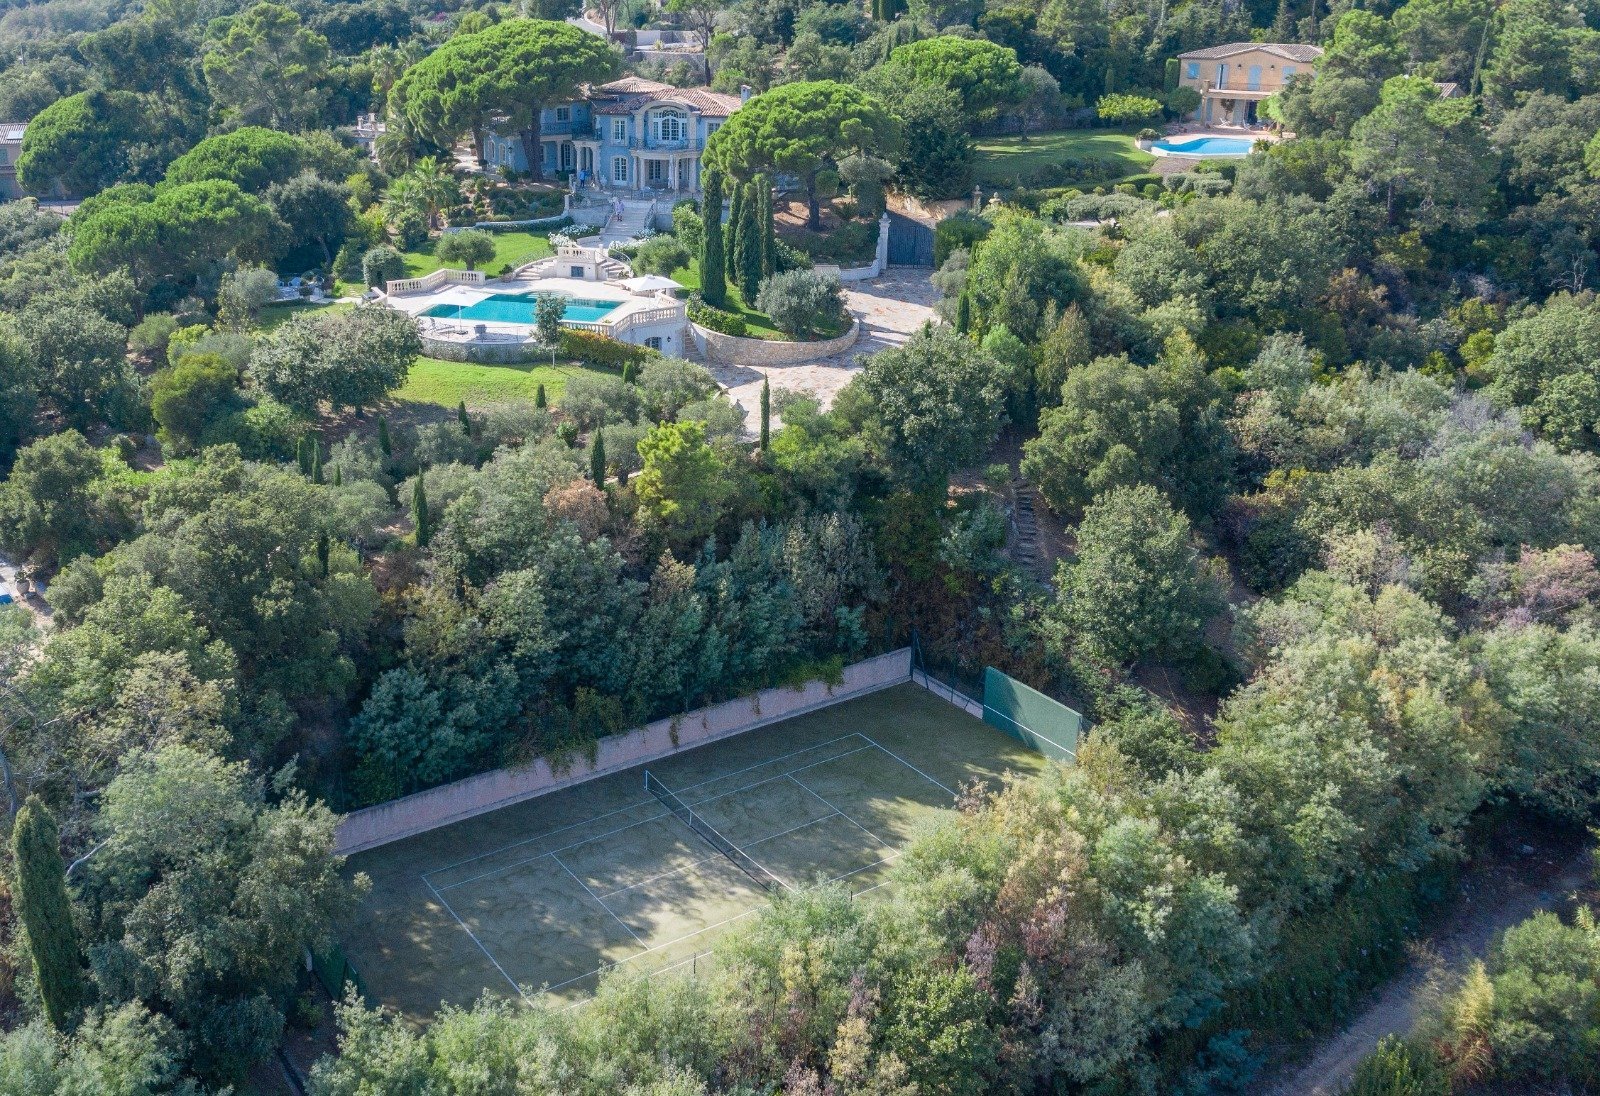 Francis York Iconic French Riviera Villa Overlooking the Bay of Saint Tropez 8.jpg